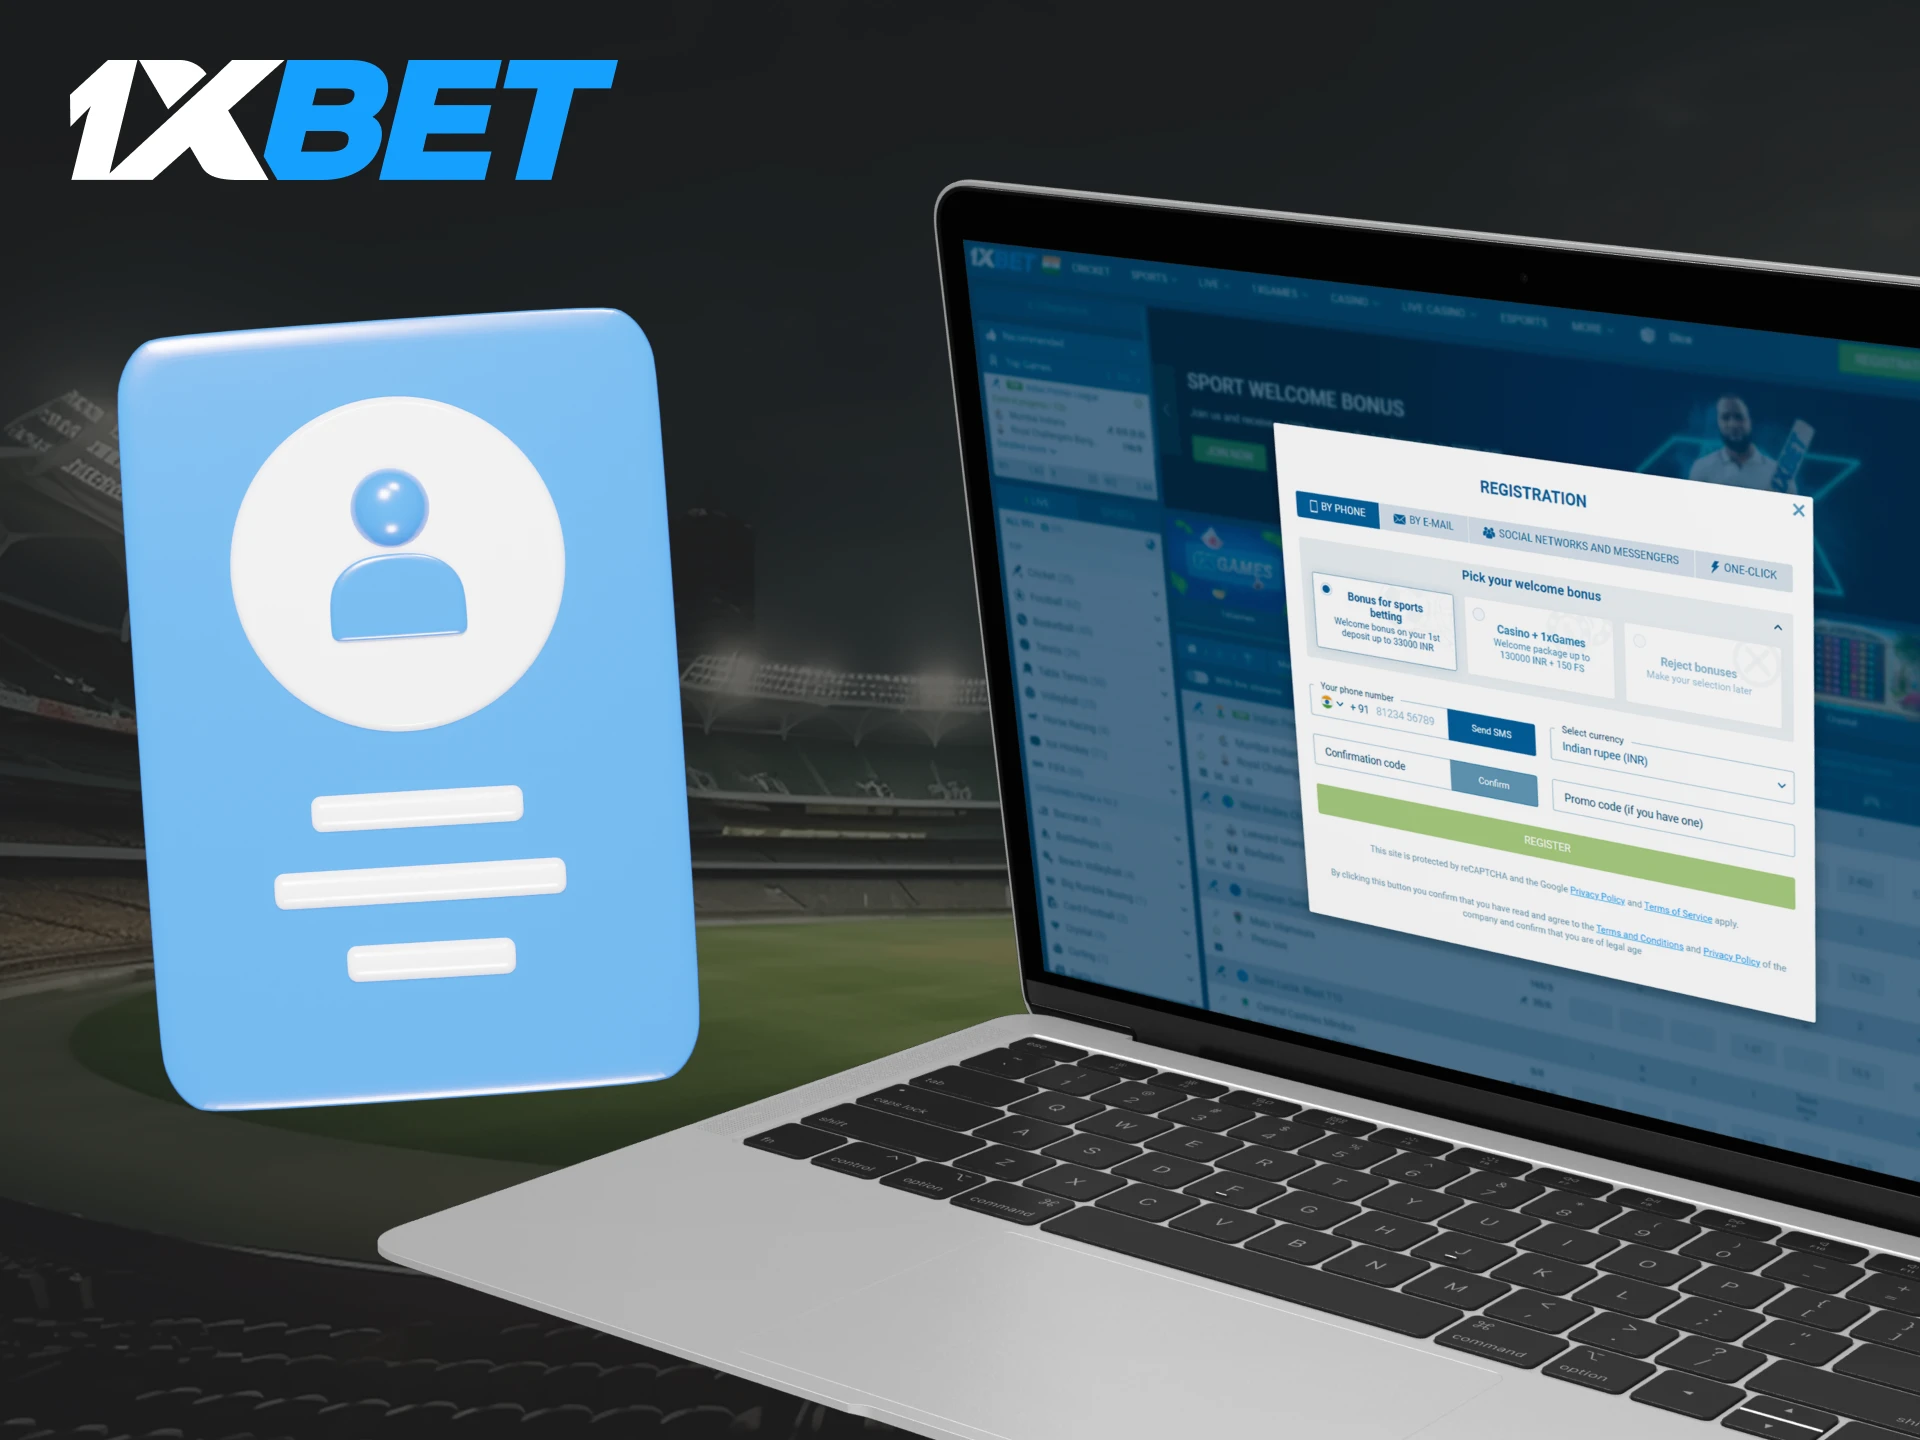 Register at 1xBet in a few seconds.